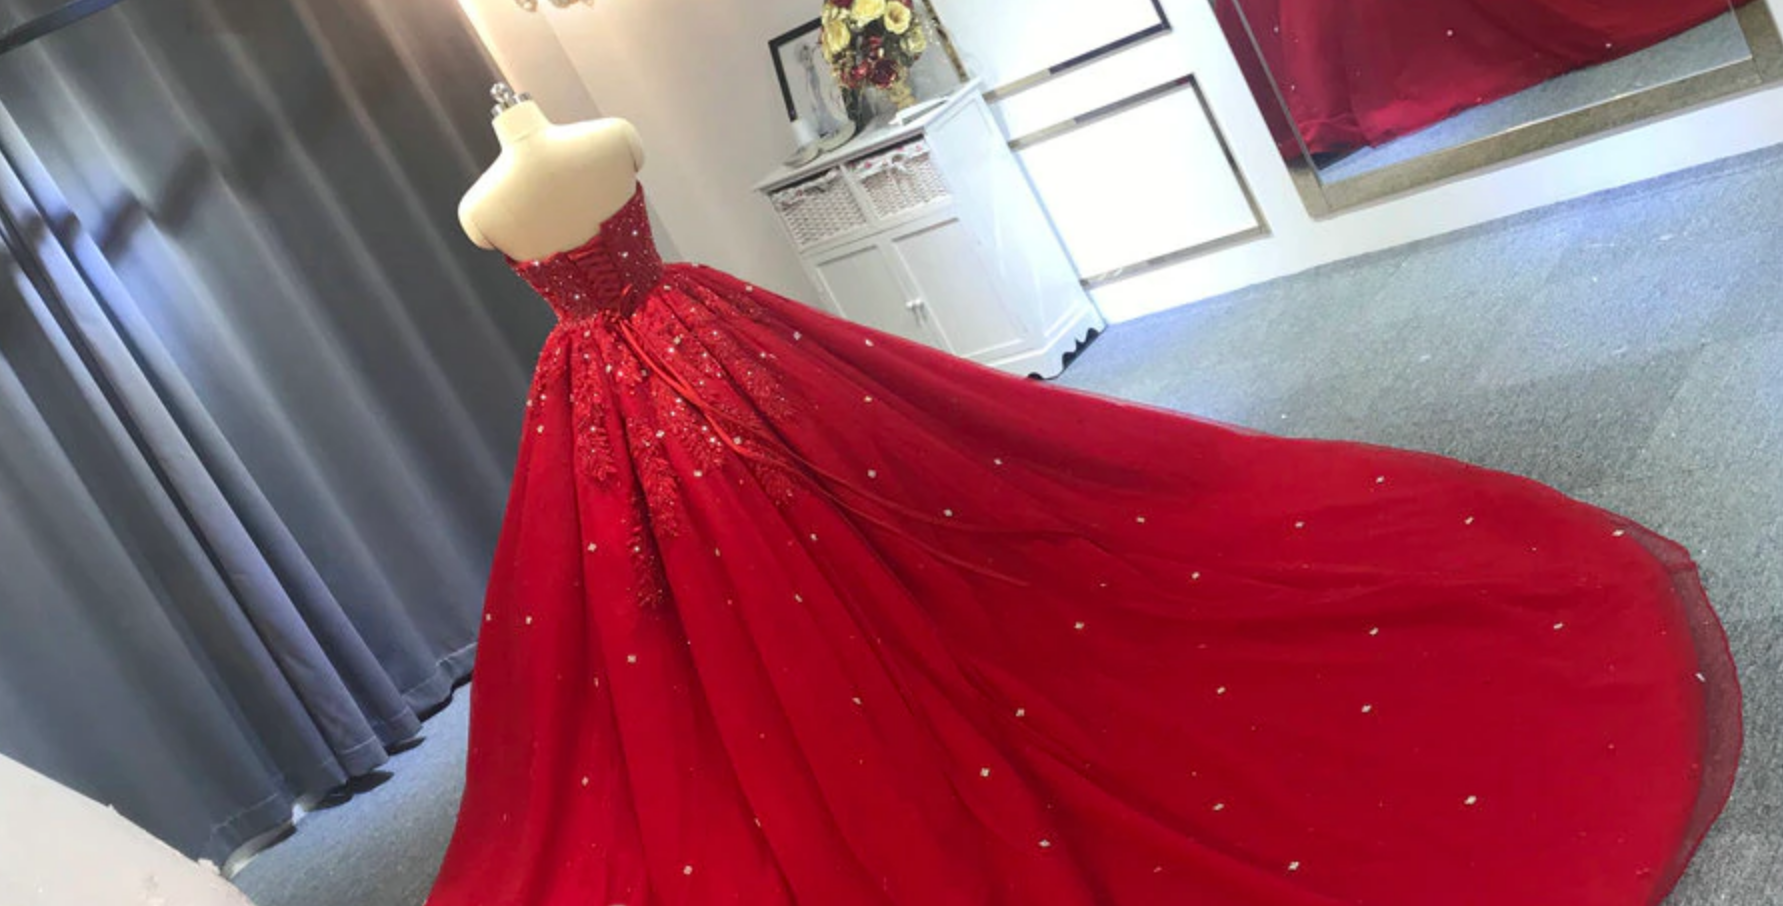 Red Maroon Princess Ball Gown Tulle Wedding Dress Red Prom Dress